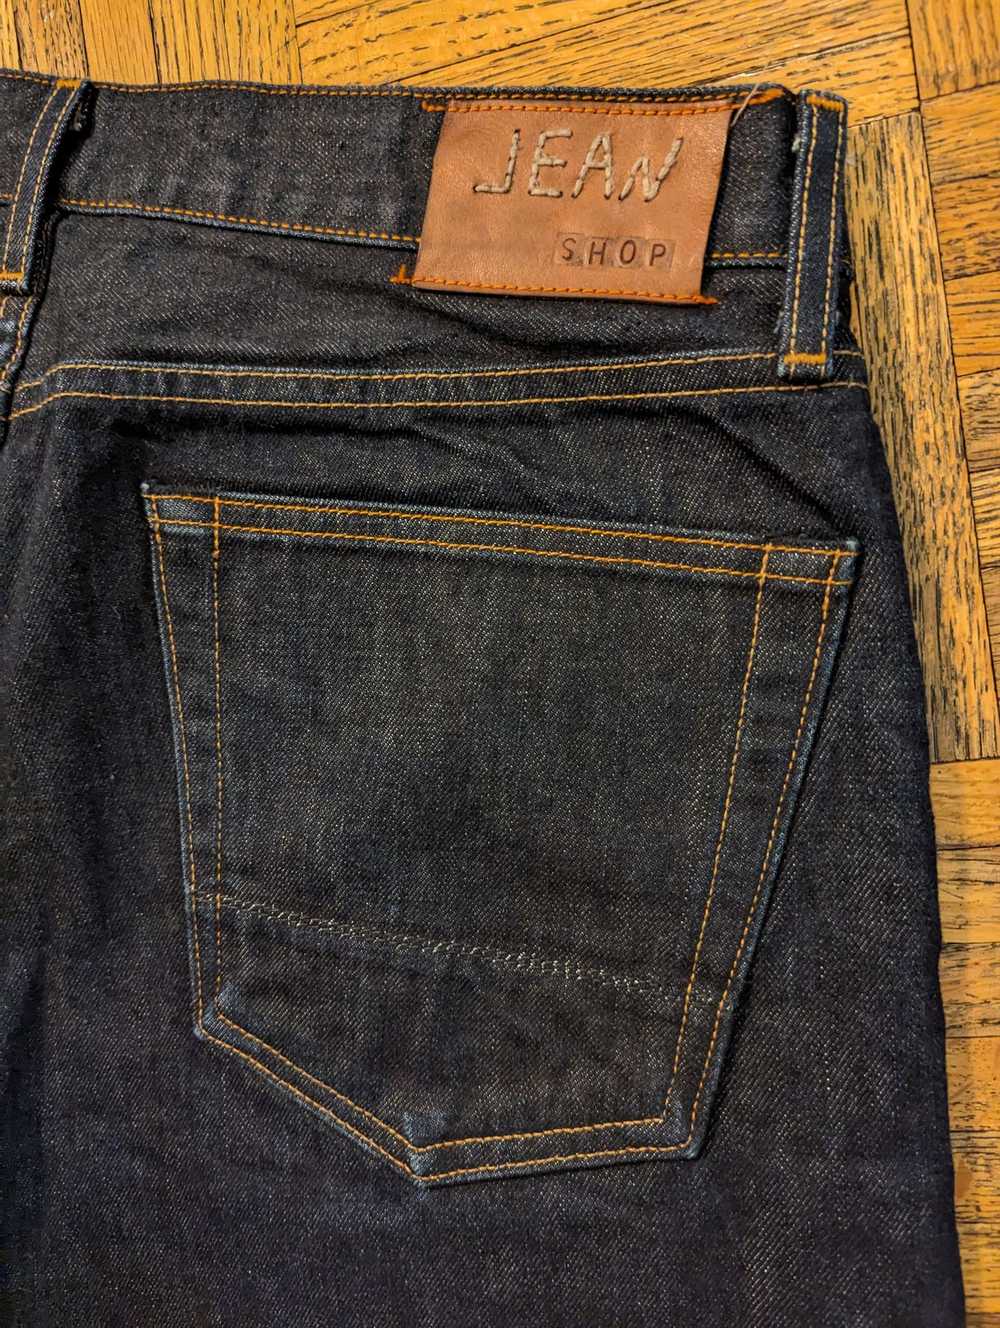 Jean Shop Selvedge jeans, made in USA - image 9